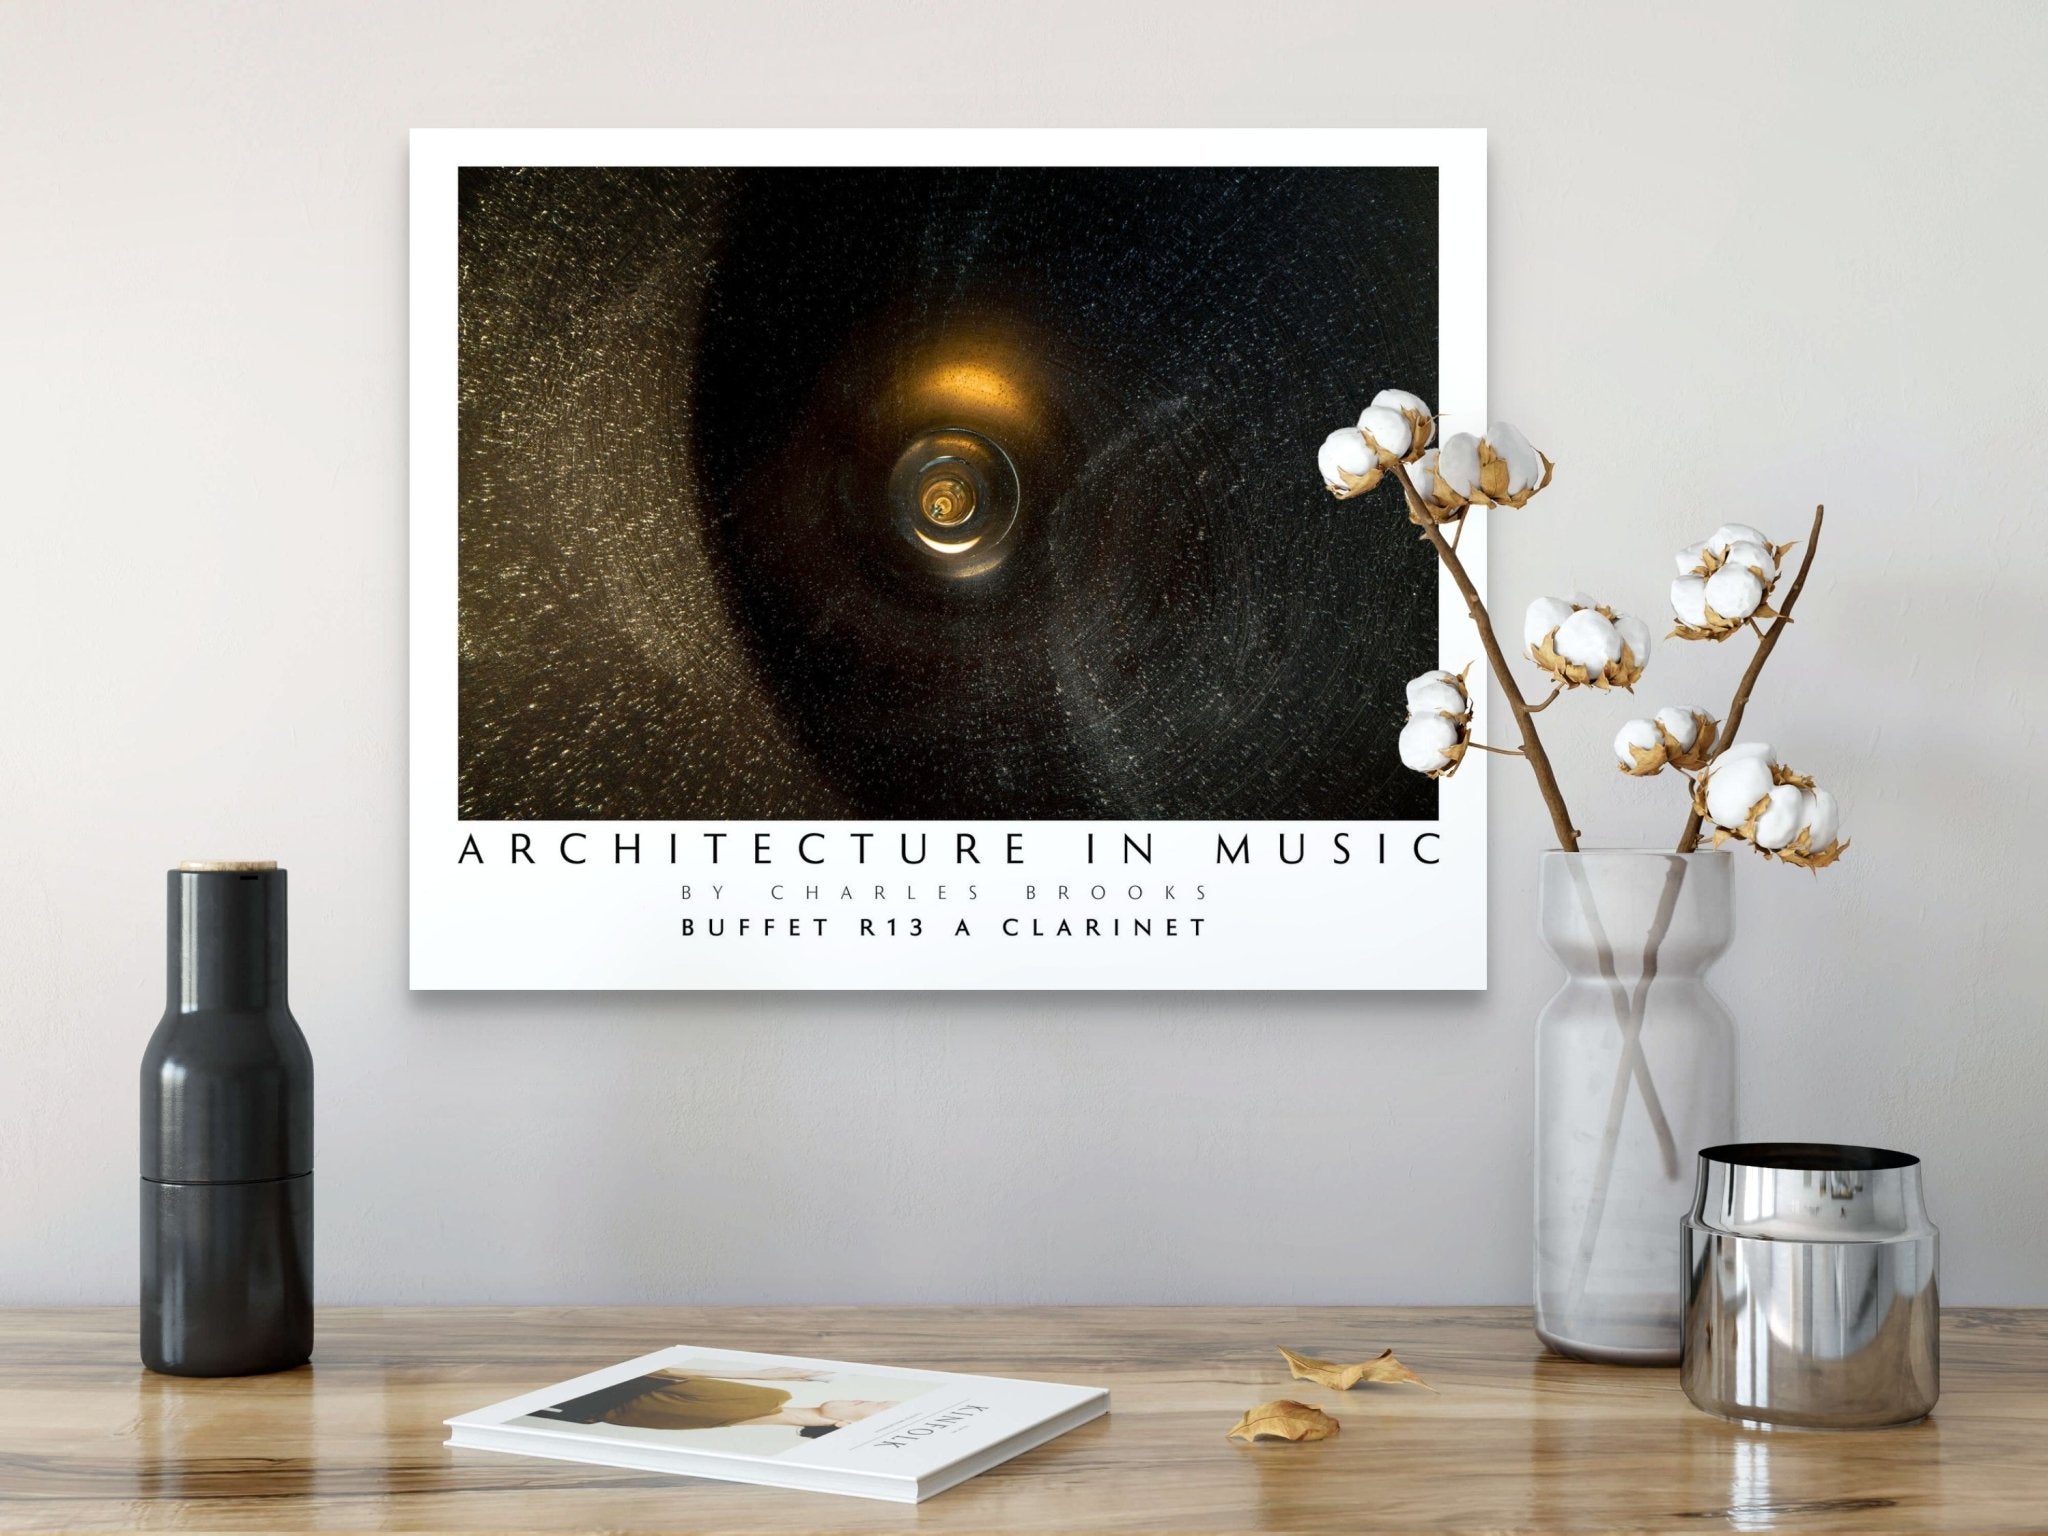 Photo of Buffet R13 A Clarinet, part 1. High Quality Poster. - Giclée Poster Print - Architecture In Music